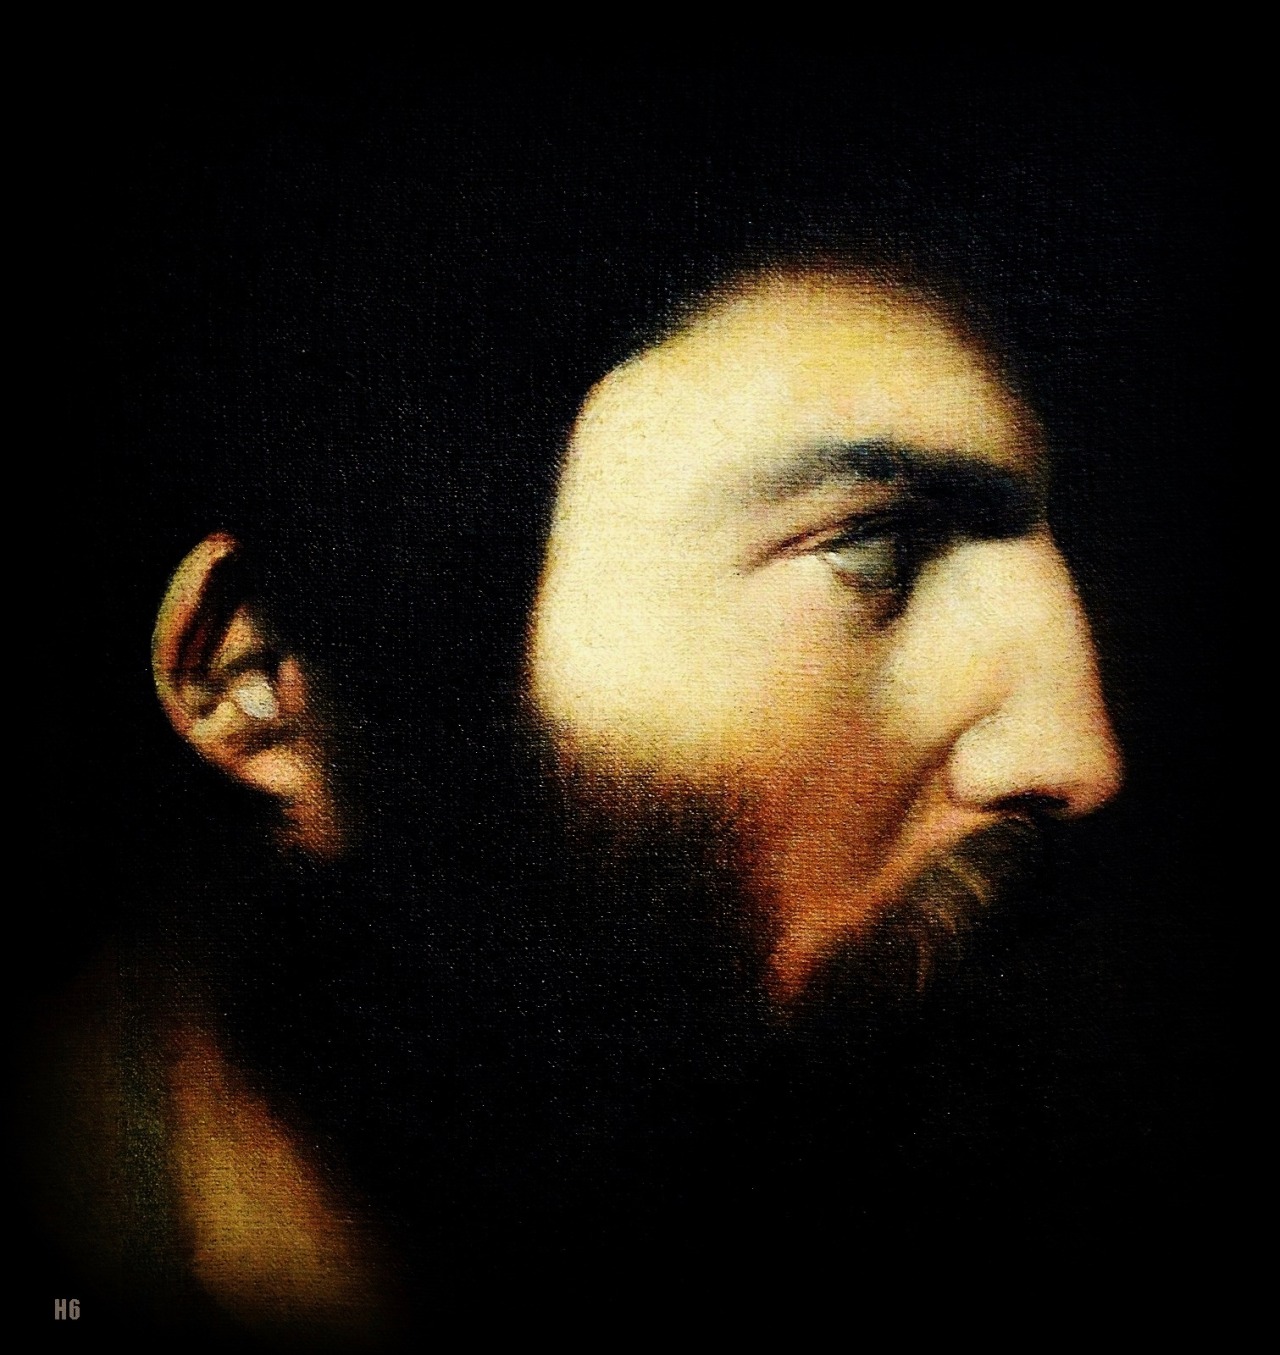 Profile of a Bearded Man.  Jean Auguste Dominique Ingres. French 1780-1867. oil/canvas.
http://hadrian6.tumblr.com